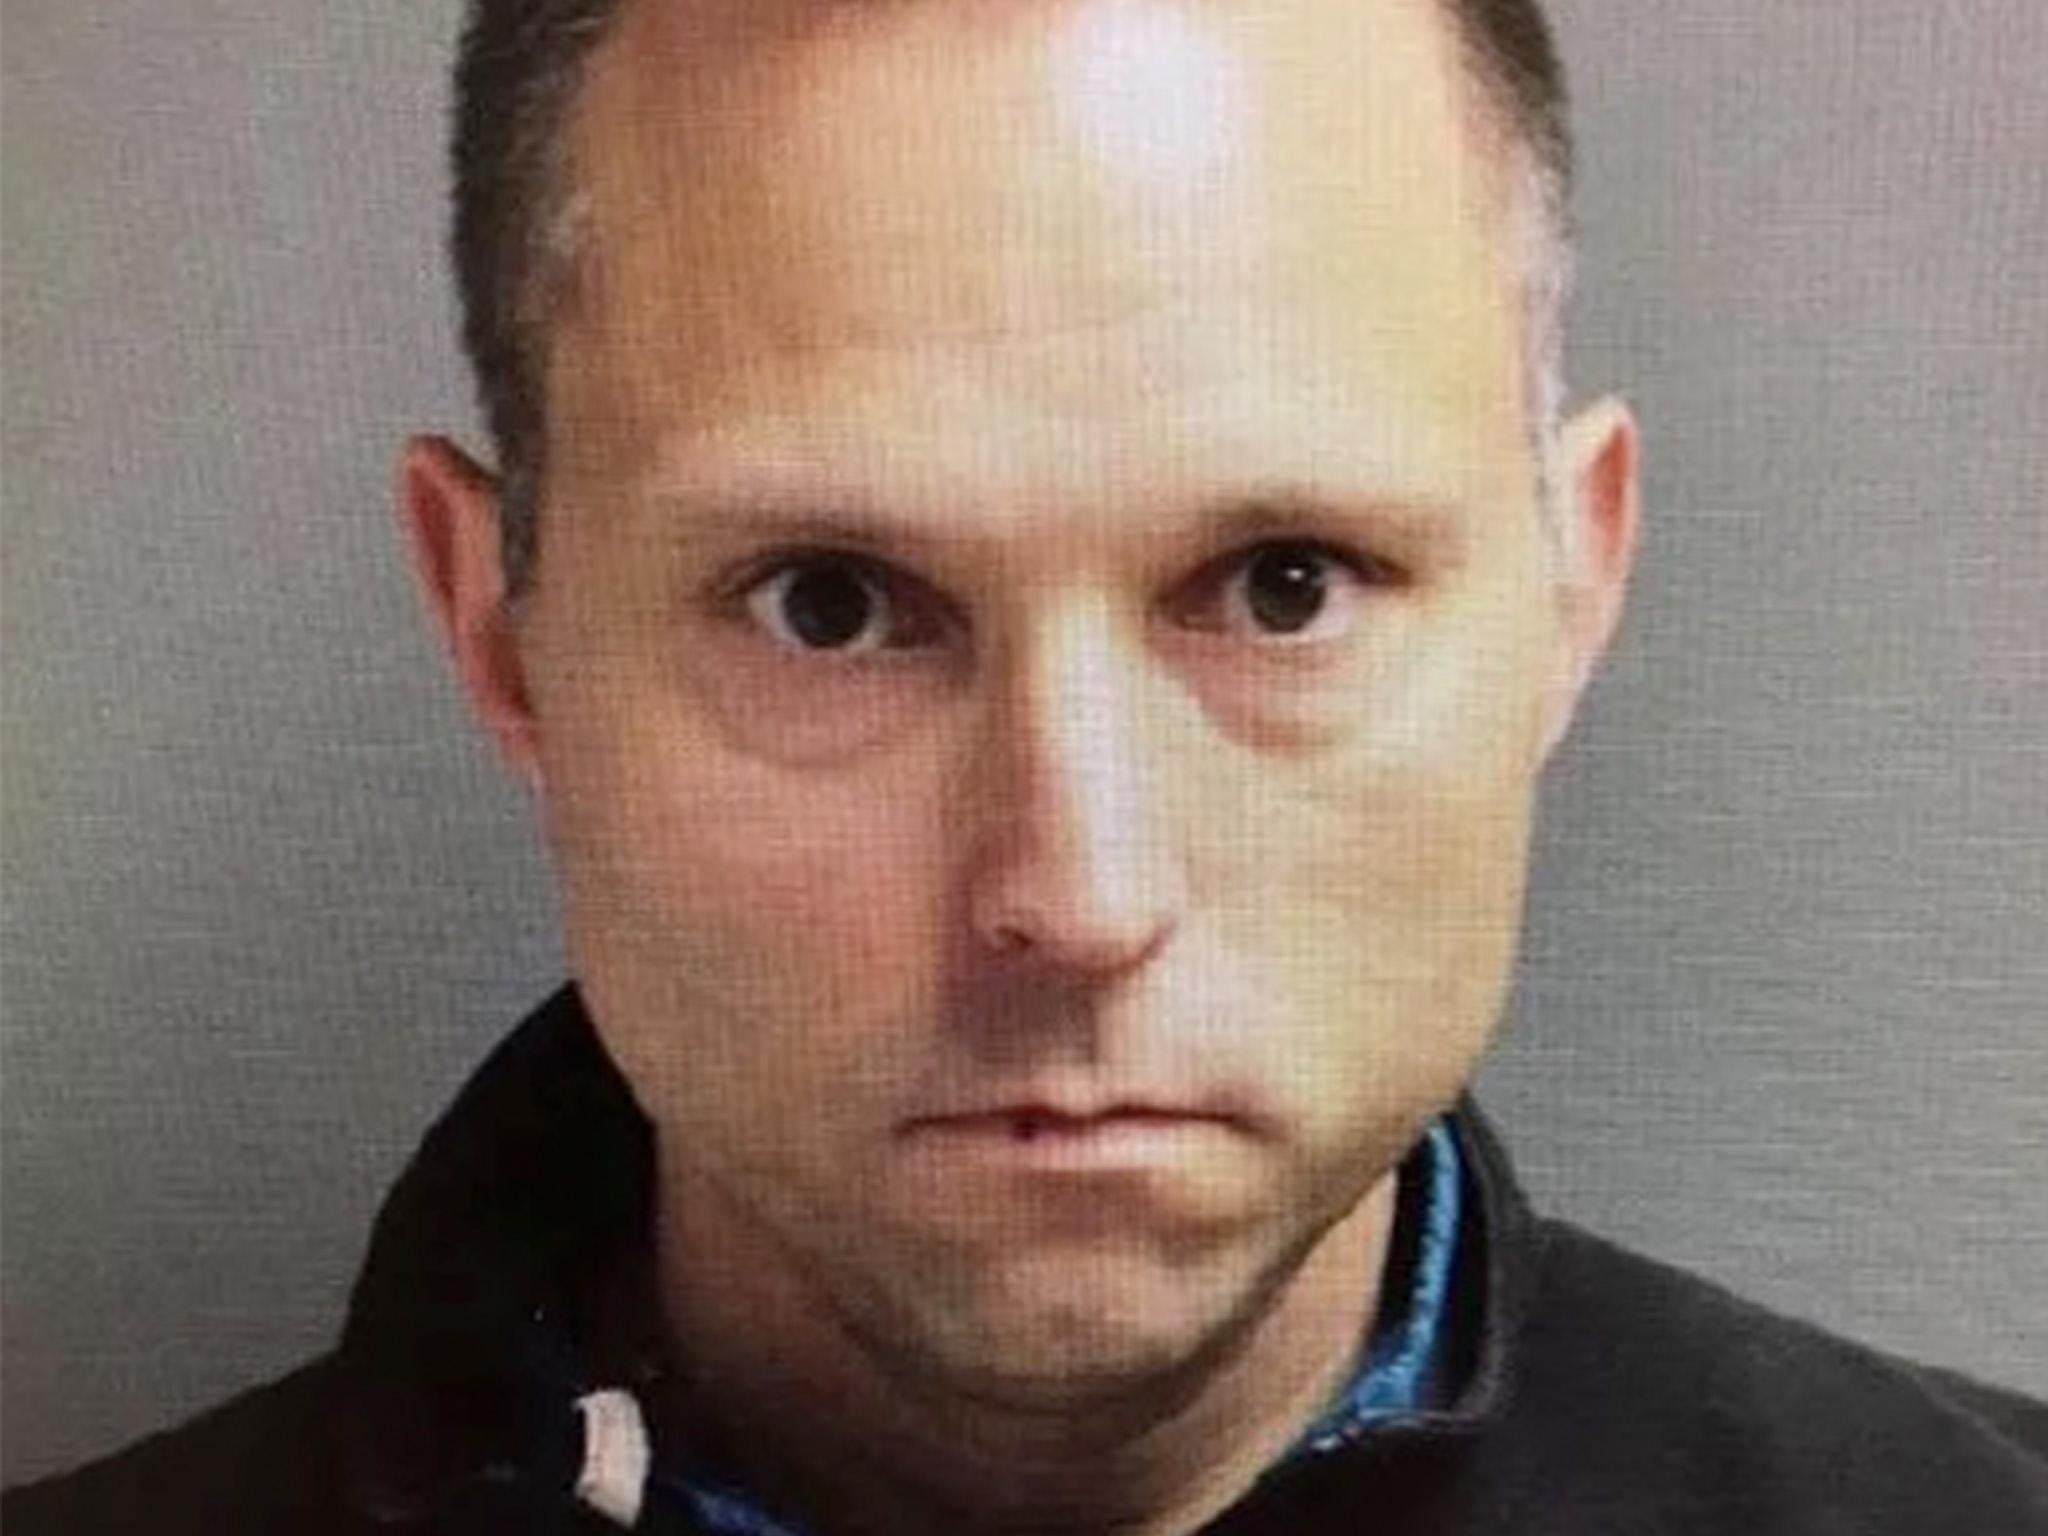 Thomas Tramaglini was caught defecating in the grounds of Holmdel High School in New Jersey